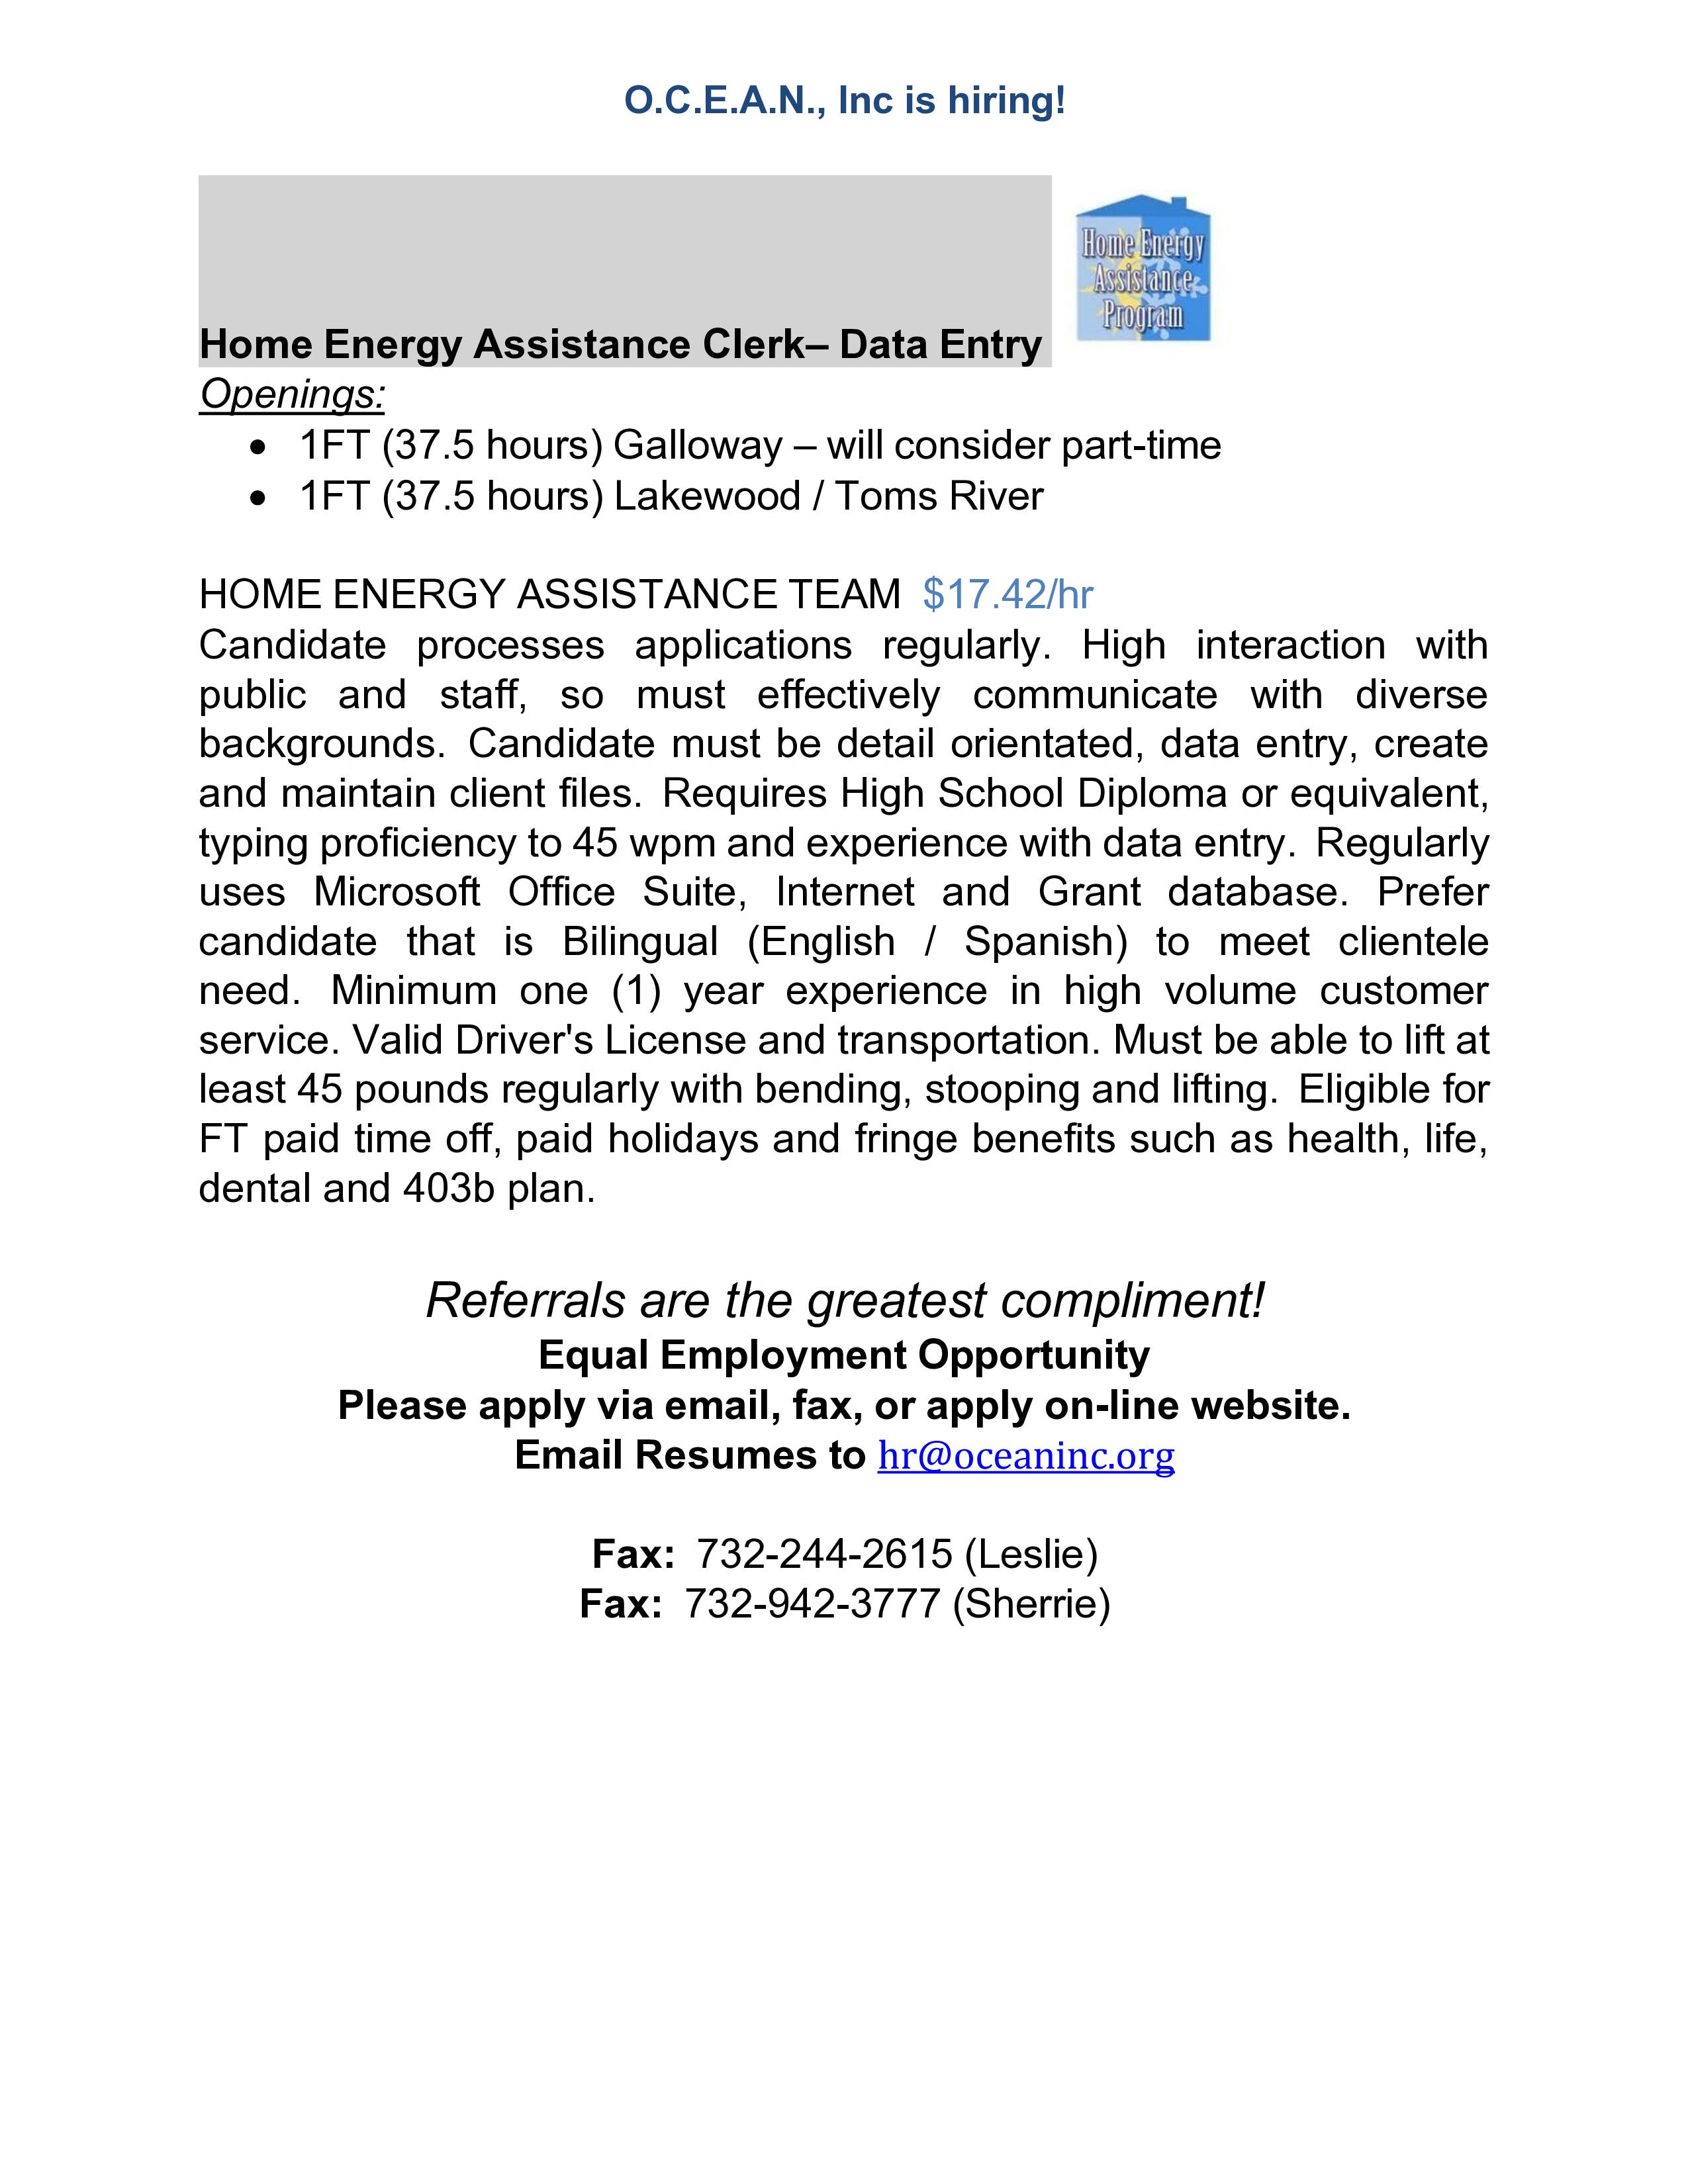 O.C.E.A.N., Inc is hiring!   Home Energy Assistance Clerk– Data Entry